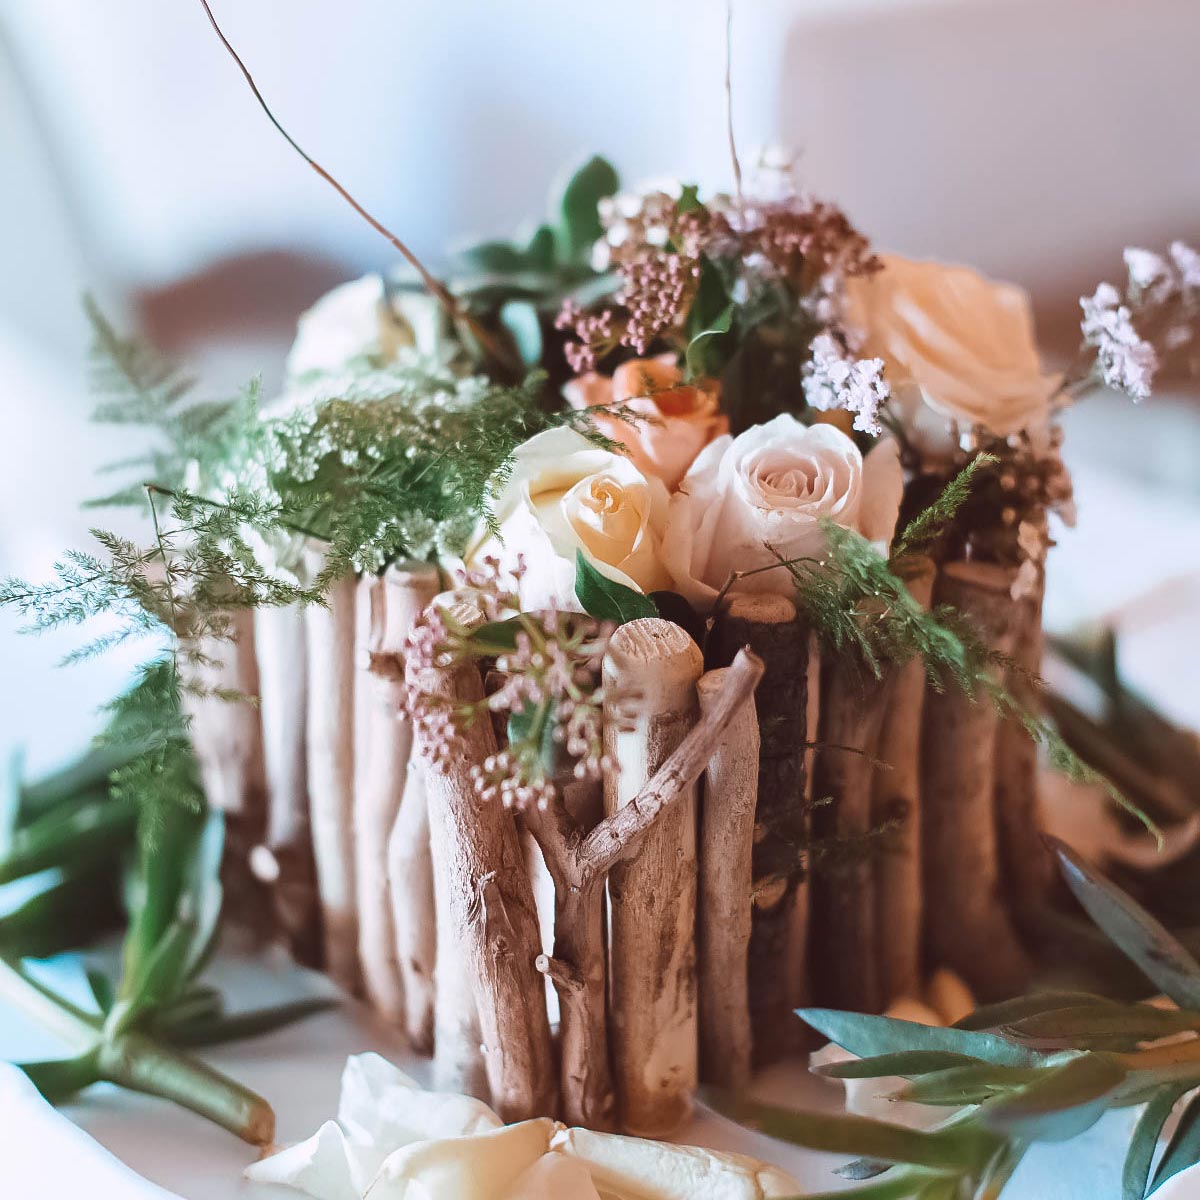 Rustic floral centrepiece with white roses and greenery arranged in a wooden twig holder, perfect for weddings. Fabulous Flowers and Gifts.